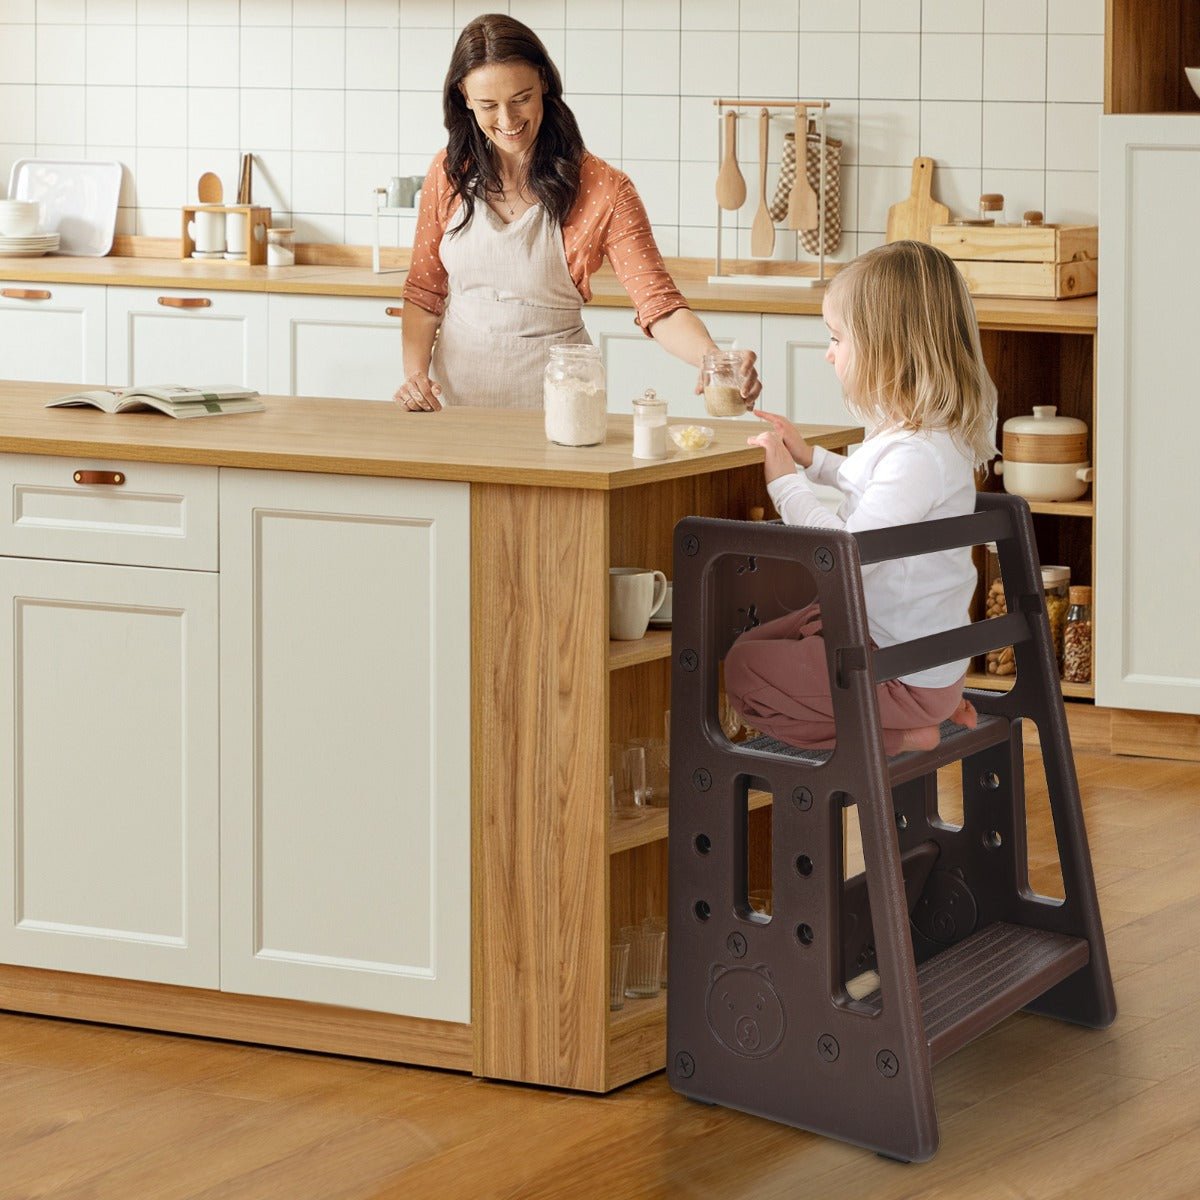 Kids Step Stool - Coffee-coloured Learning Aid with Dual Safety Rails